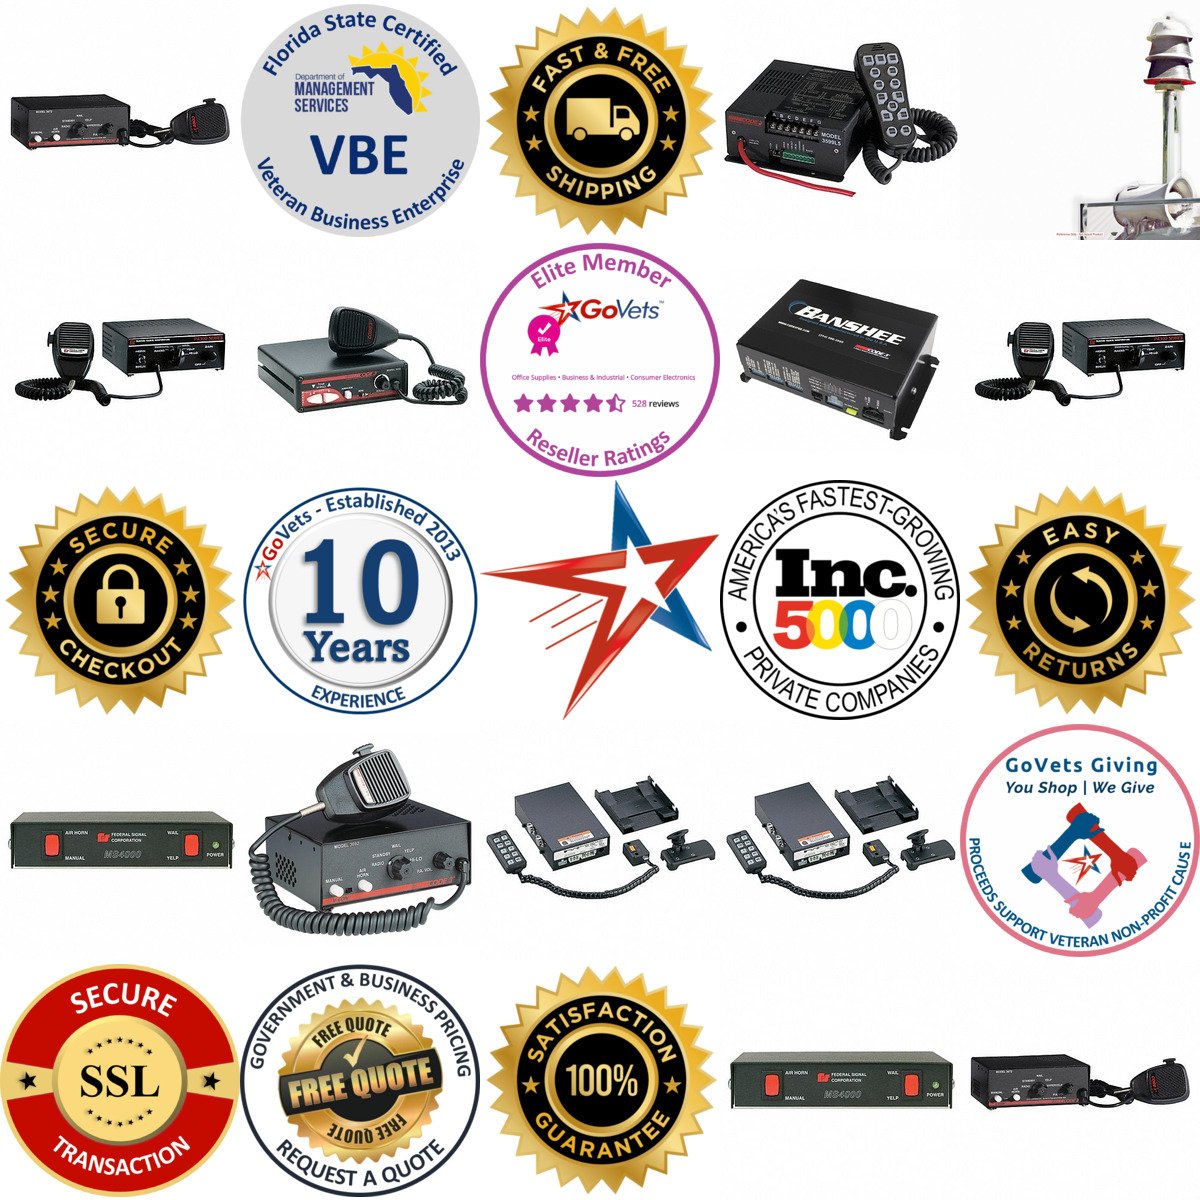 A selection of Electronic Siren Systems products on GoVets